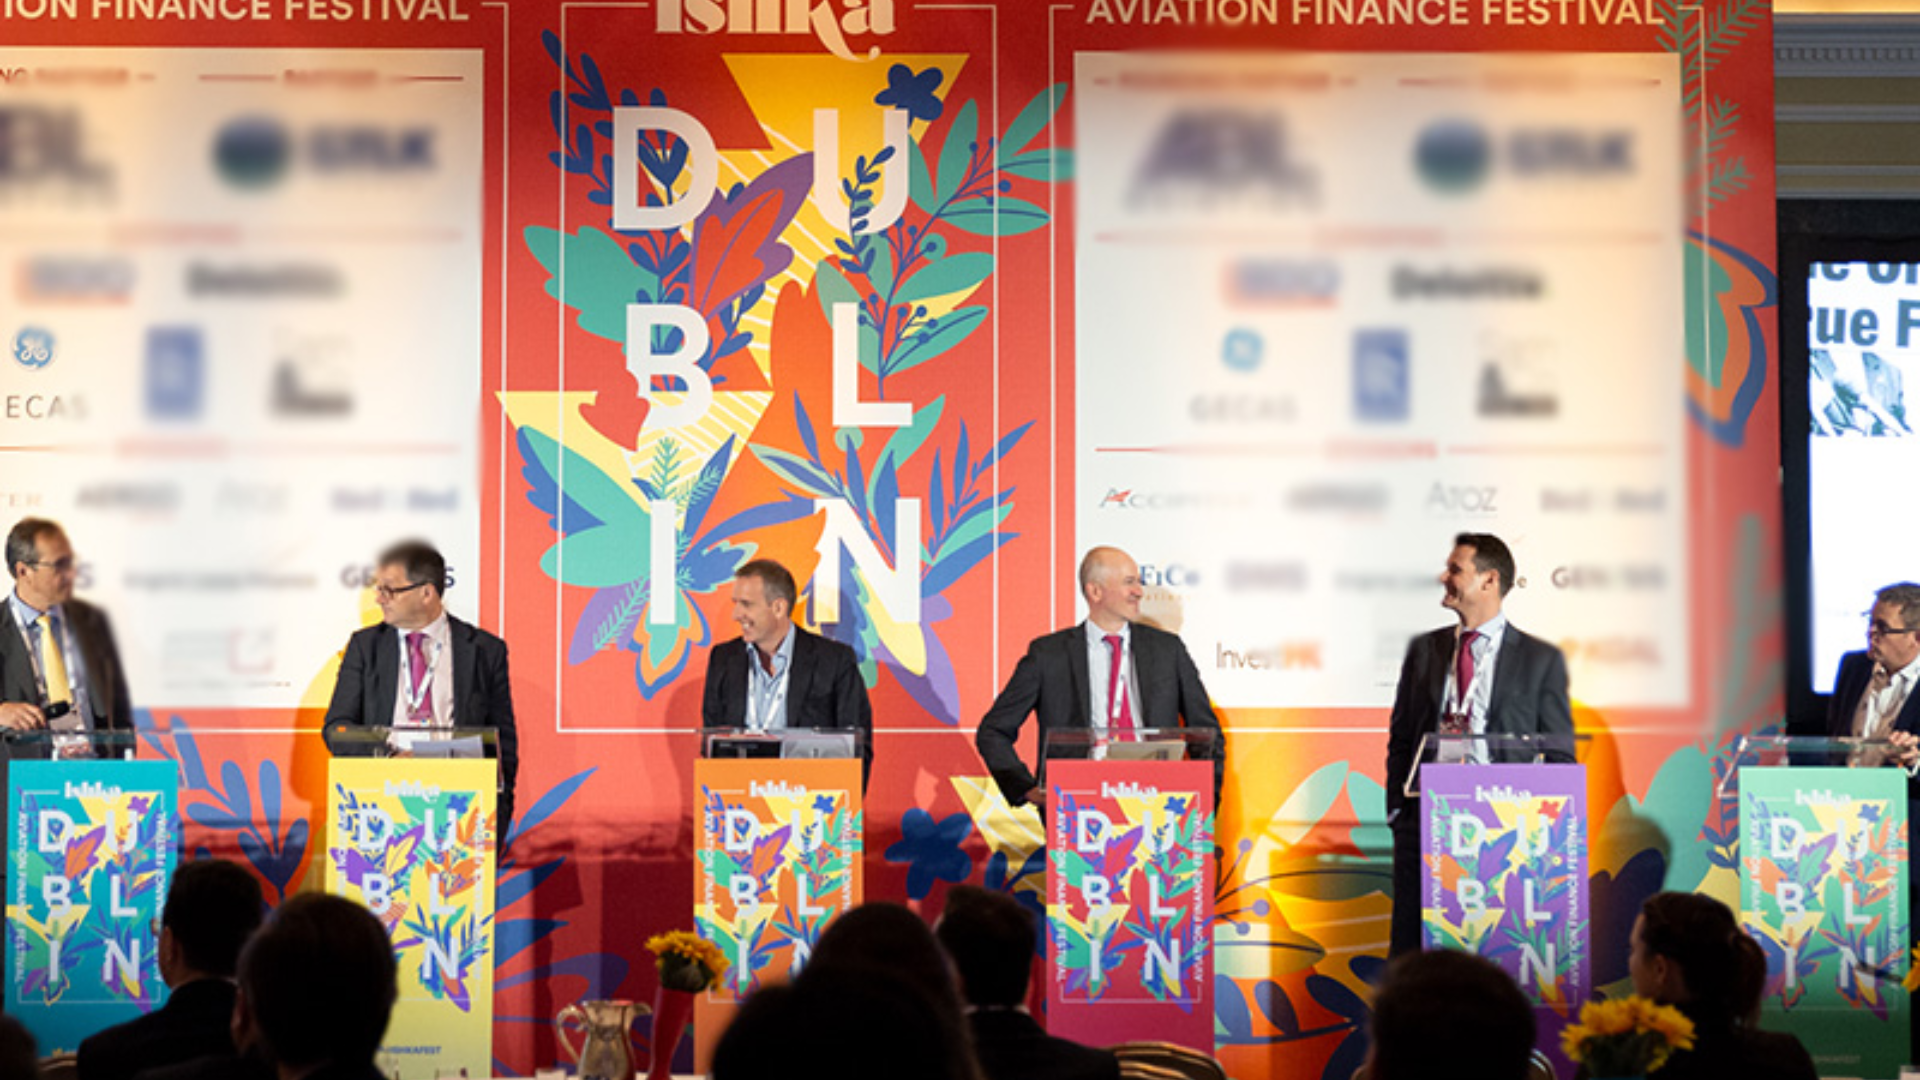 Middle Eastern airlines: How to best manage widebodies?